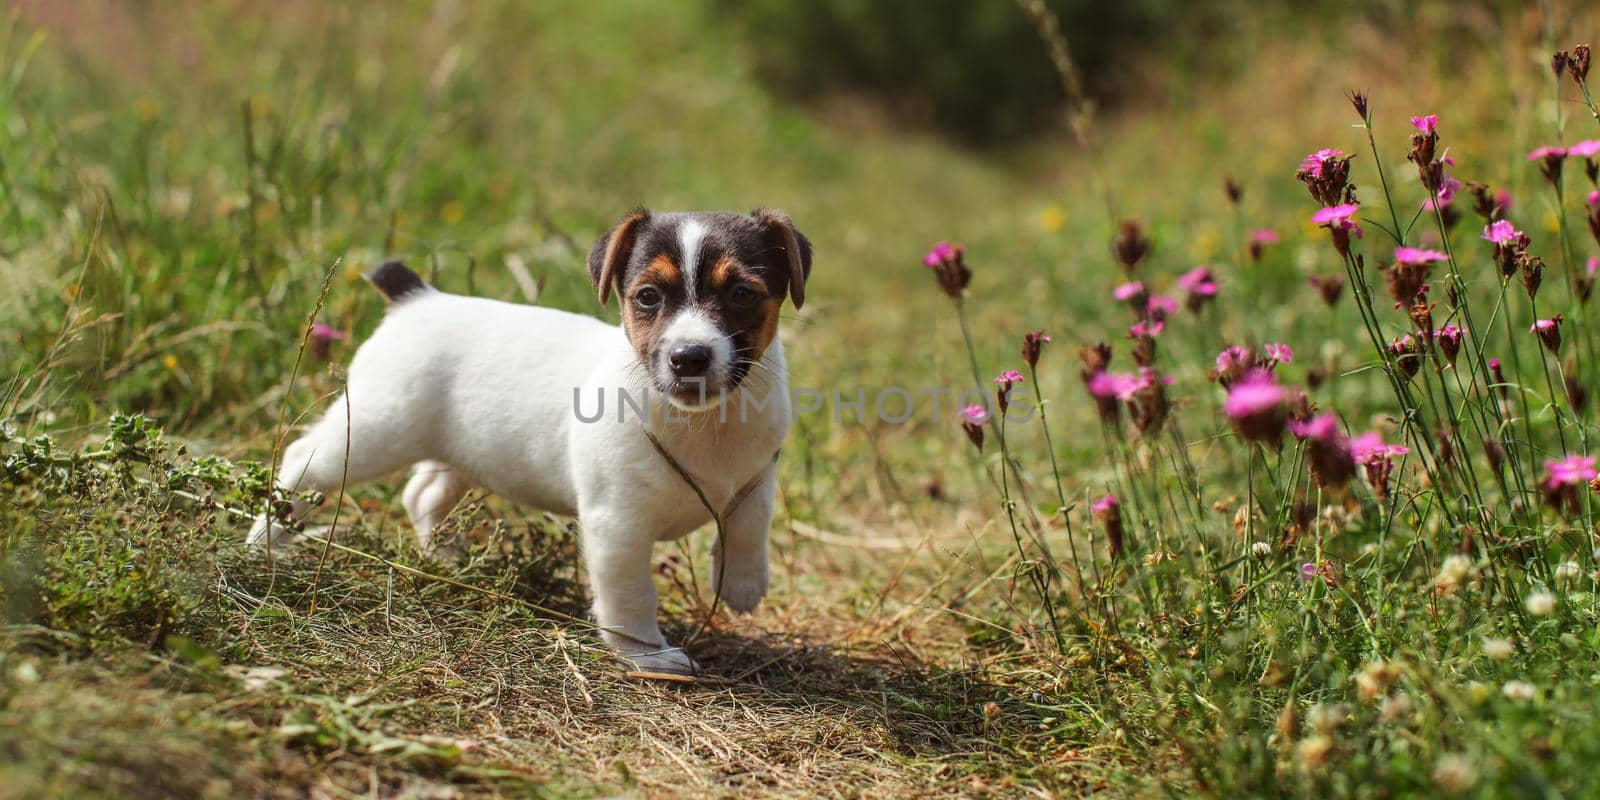 Two months old Jack Russell terrier puppy walking in grass, pink carnation flowers next to her, lit by sun. by Ivanko